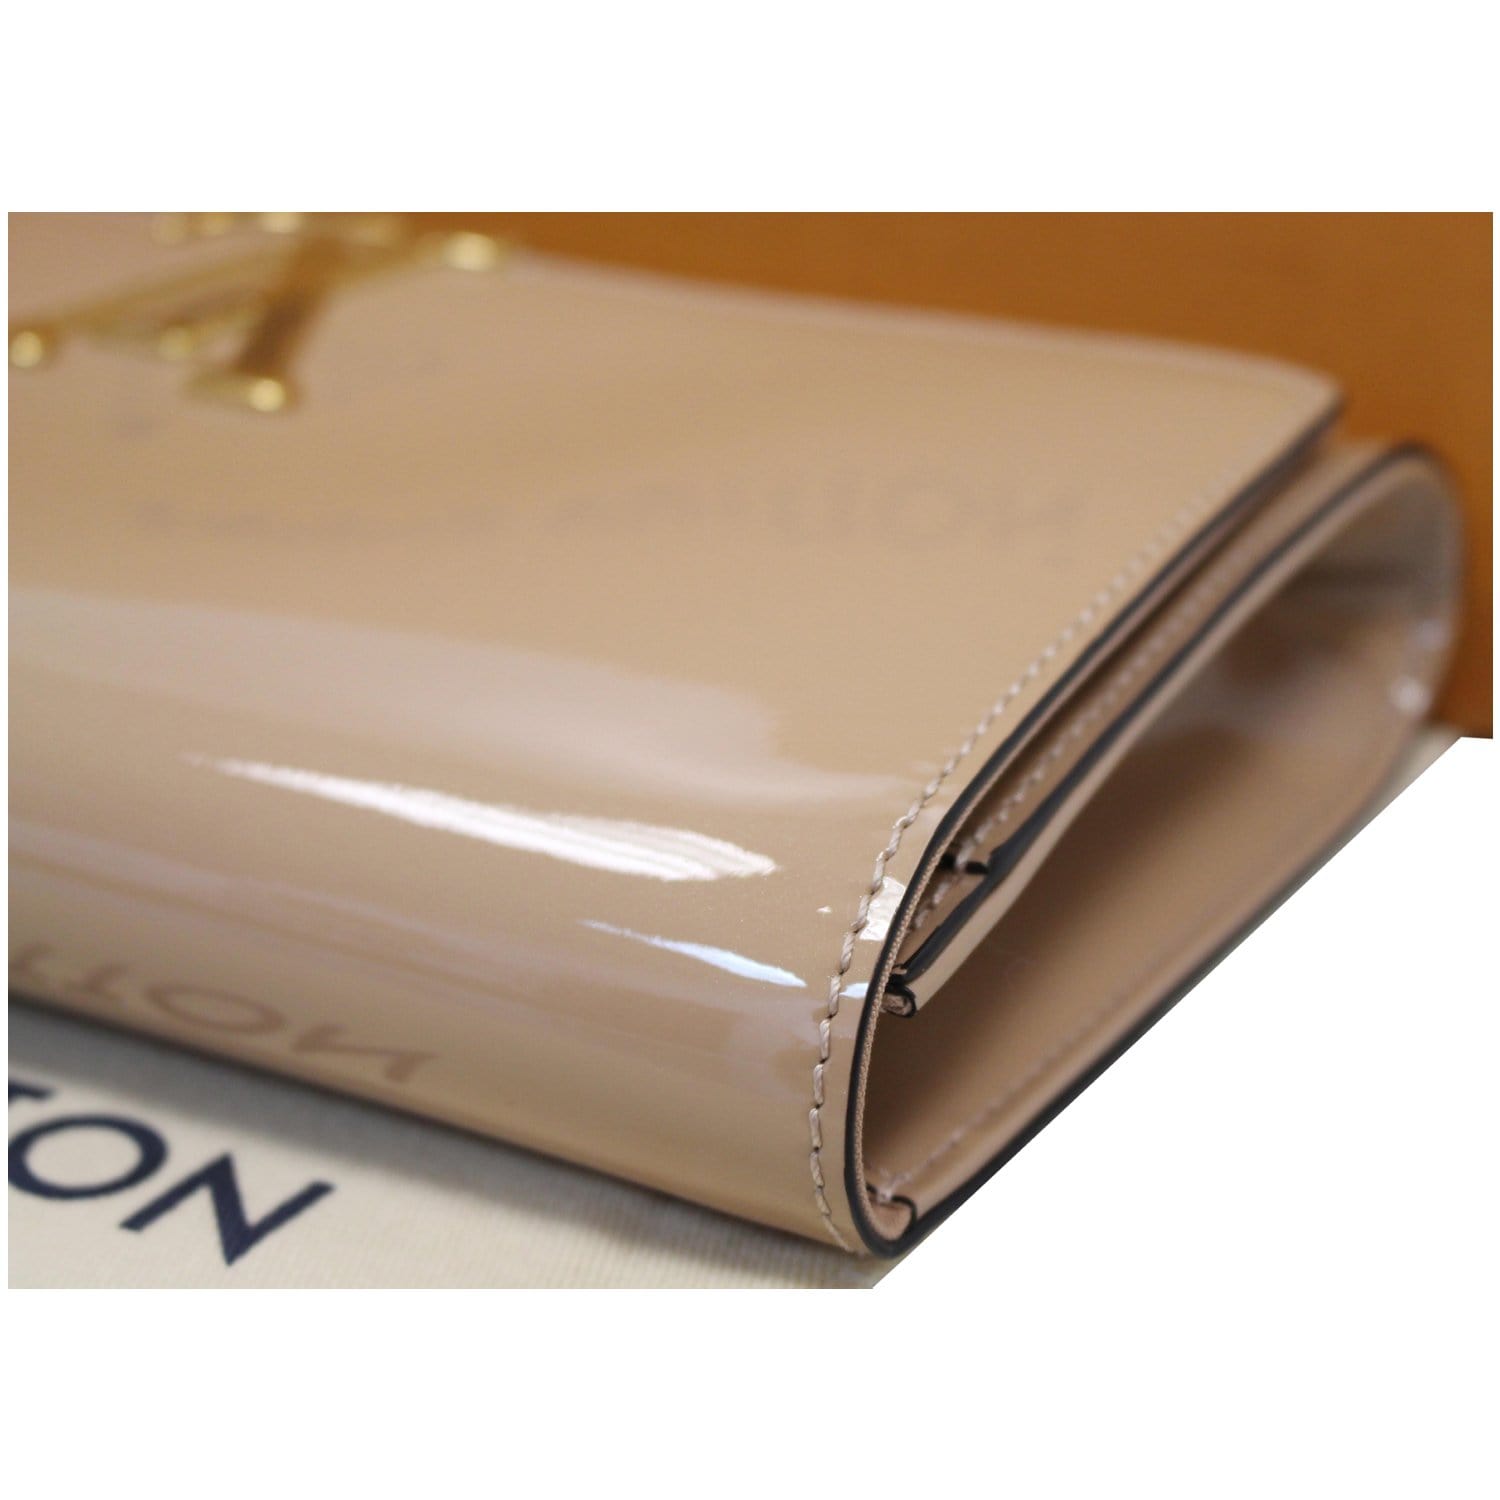 Louis Vuitton Patent Leather Wallet · Amazing Finds